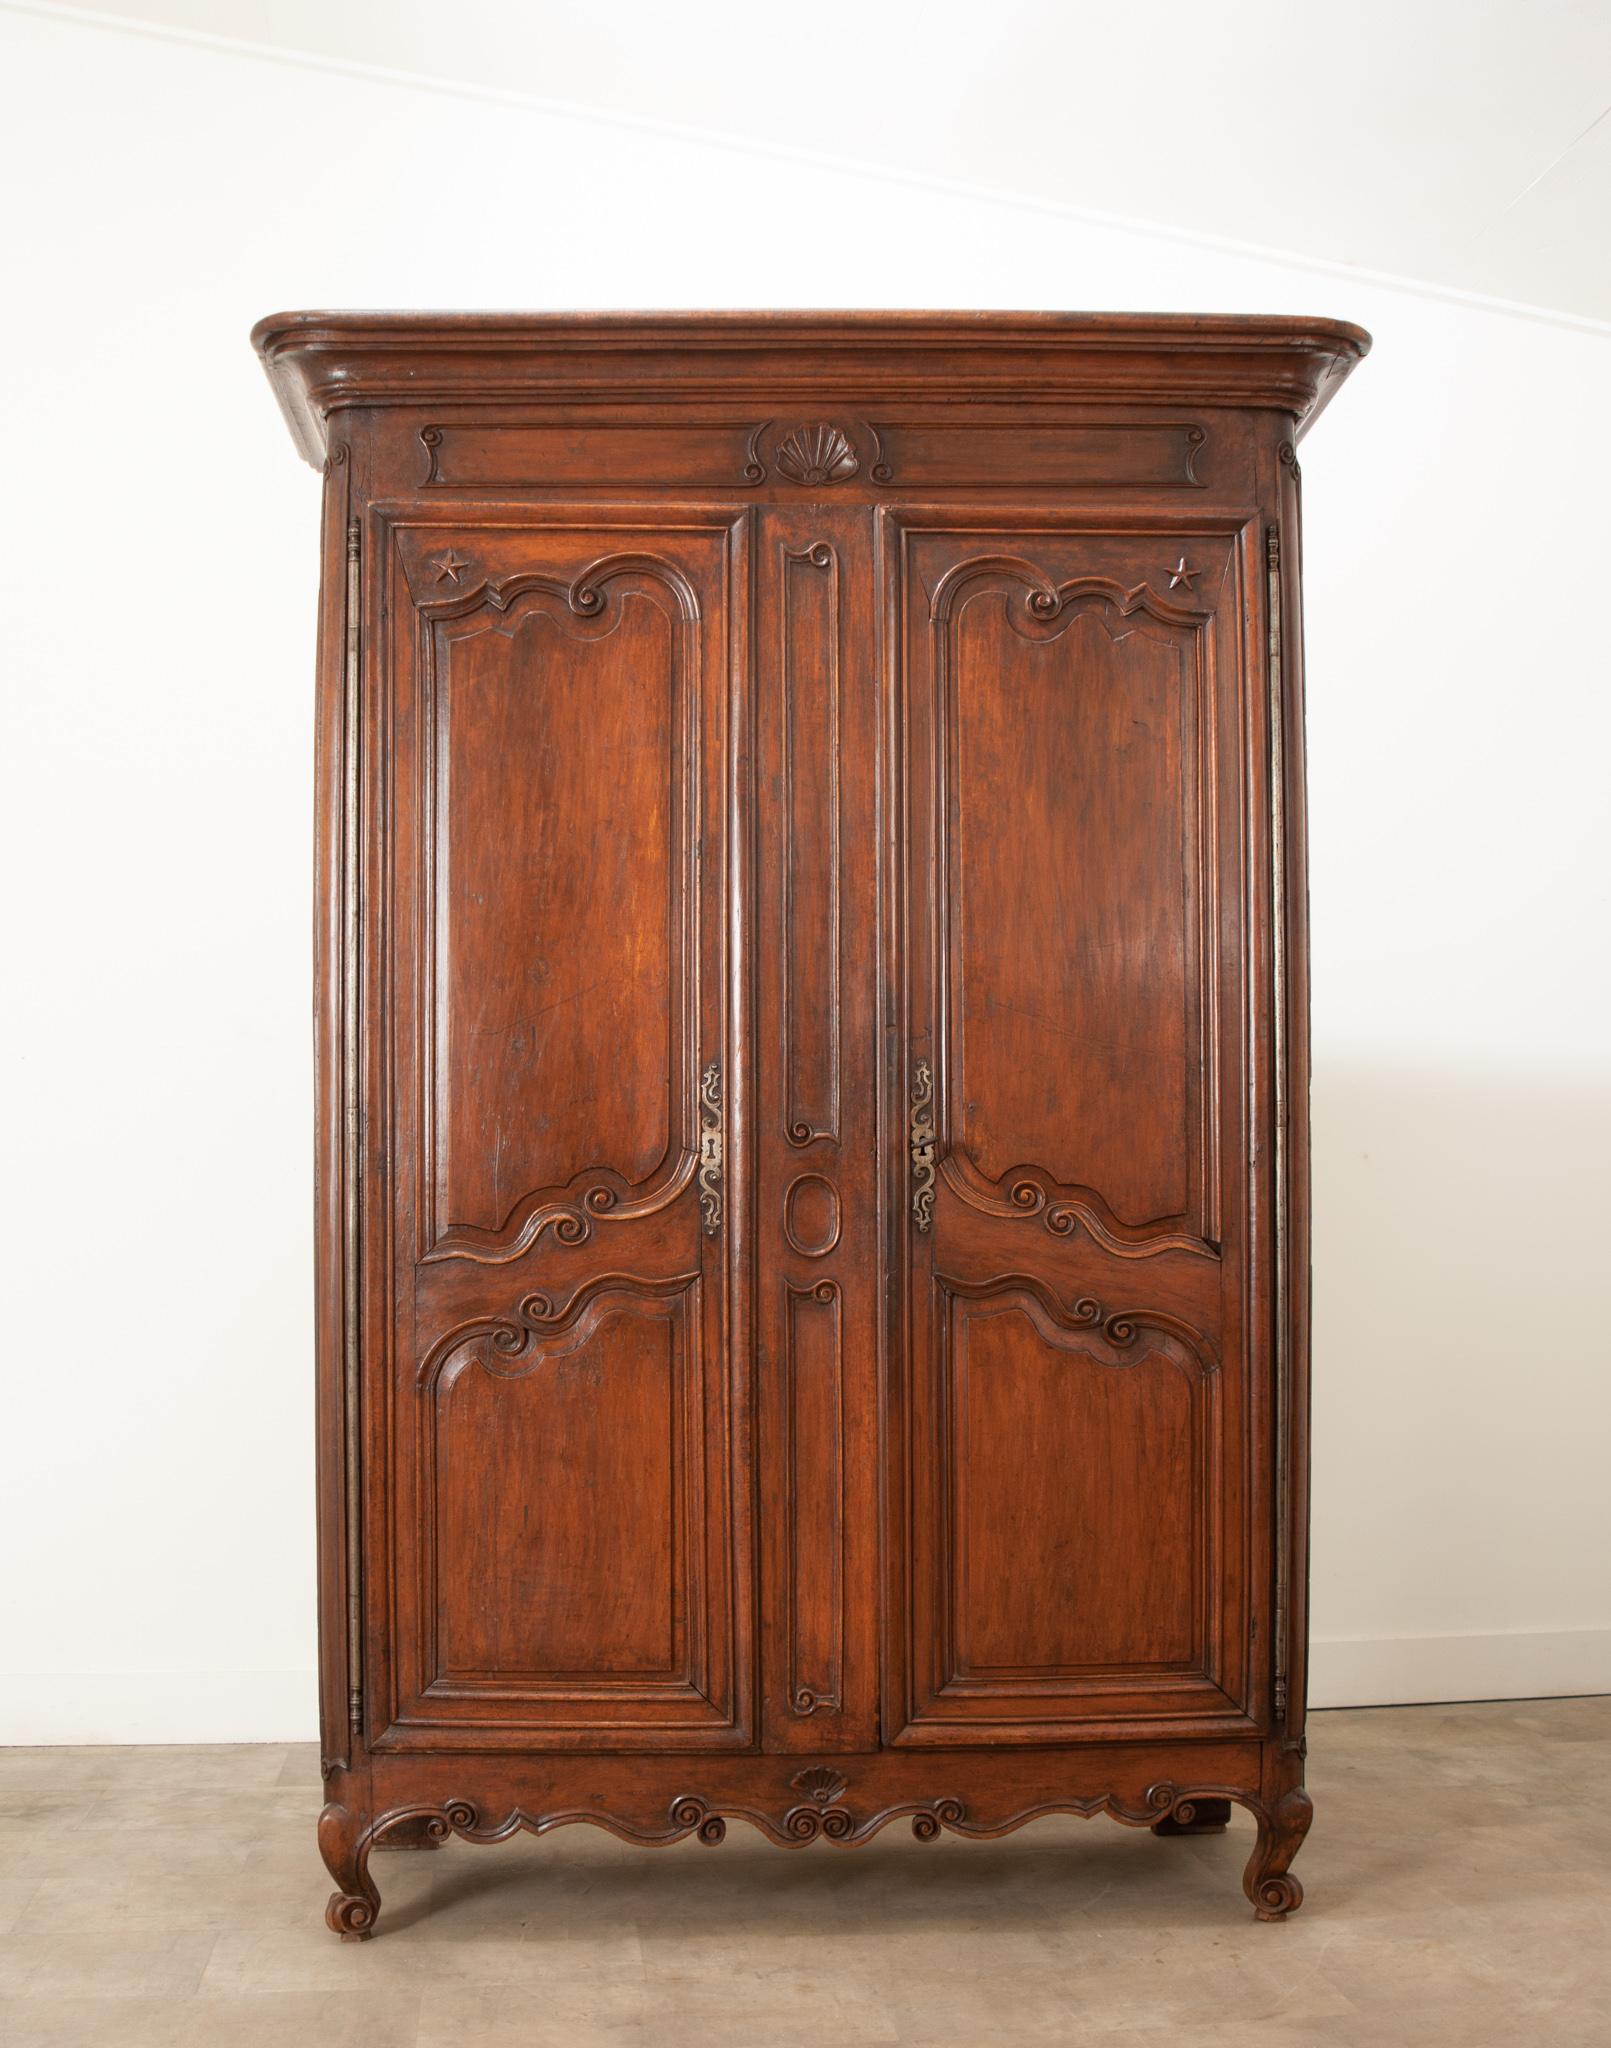 This French 18th century armoire in the Louis XV style has a fantastic dark oak finish and gorgeous hand carved details. A shaped cornice sits above elaborately paneled doors on long steel barrel hinges. This piece retains its original locking